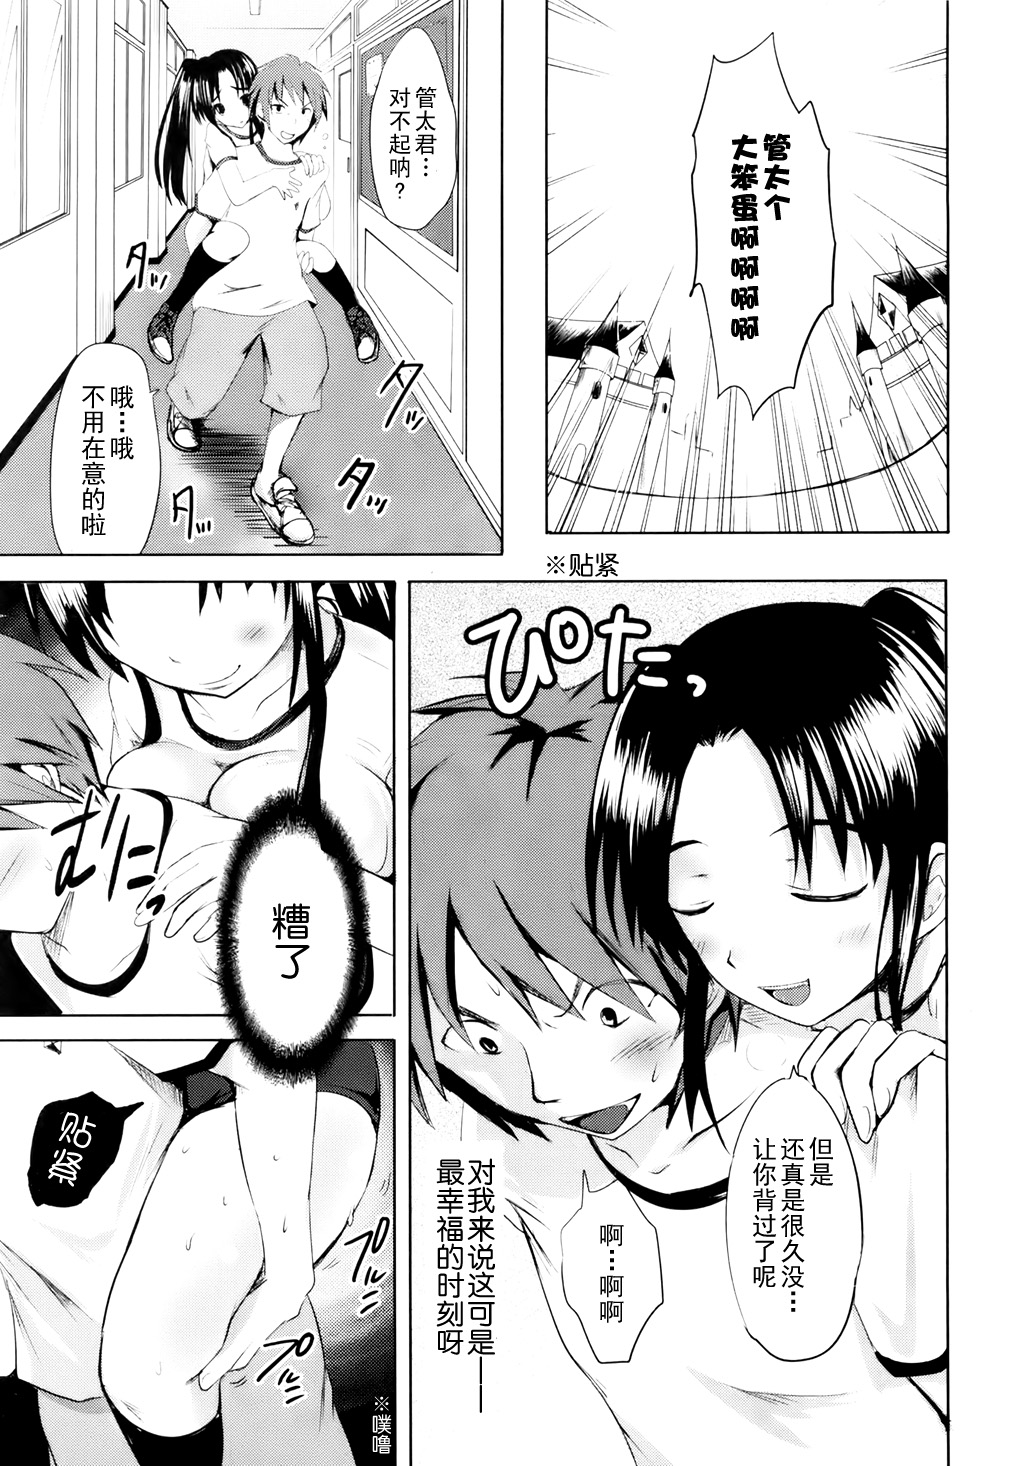 [Natsume Fumika] Sundere! Ch. 3 [Chinese] [夏目文花] スンデレ! 章3 [中文翻譯]